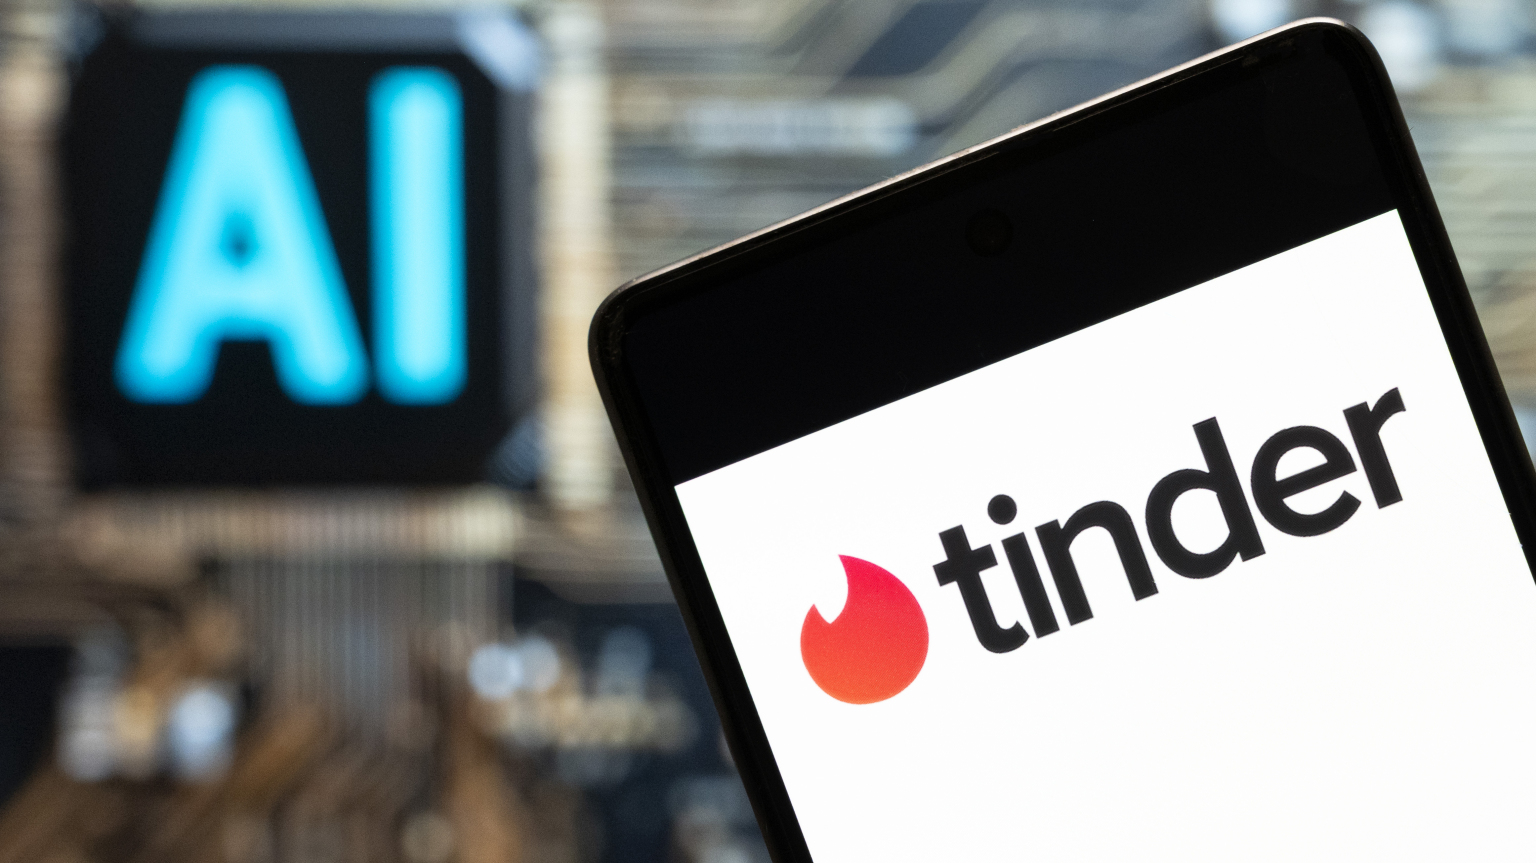 Tinder logo seen displayed on a smartphone with an Artificial intelligence (AI) chip and symbol in the background